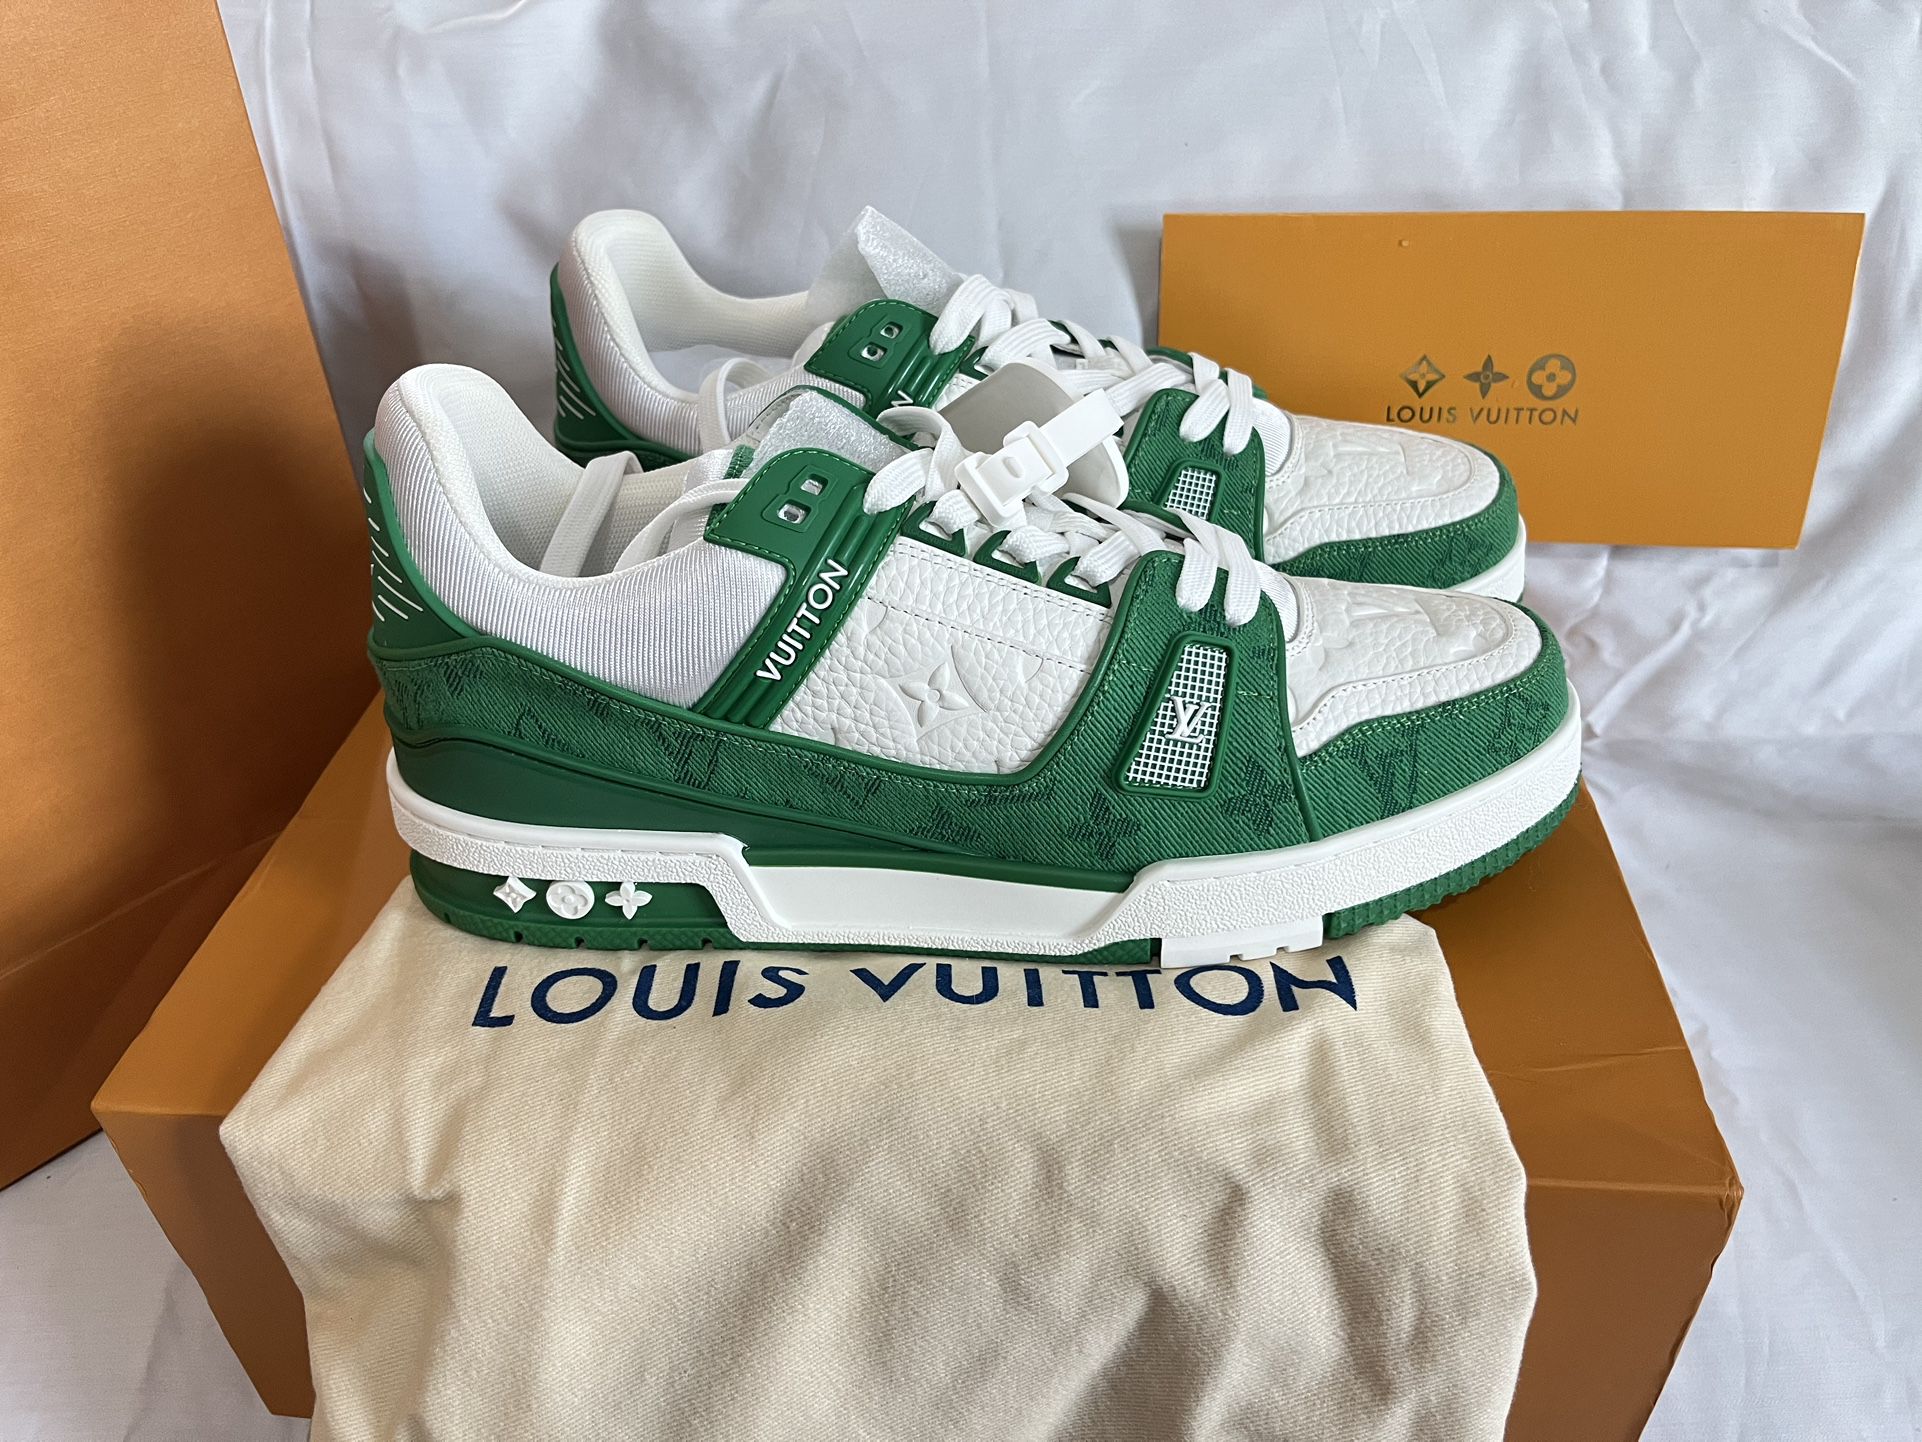 New Authentic Louis Vuitton Trainer #54 Graphic Print Blue/White Sneakers  (Euro 44/Men’s 10-11) for Sale in Valley Stream, NY - OfferUp